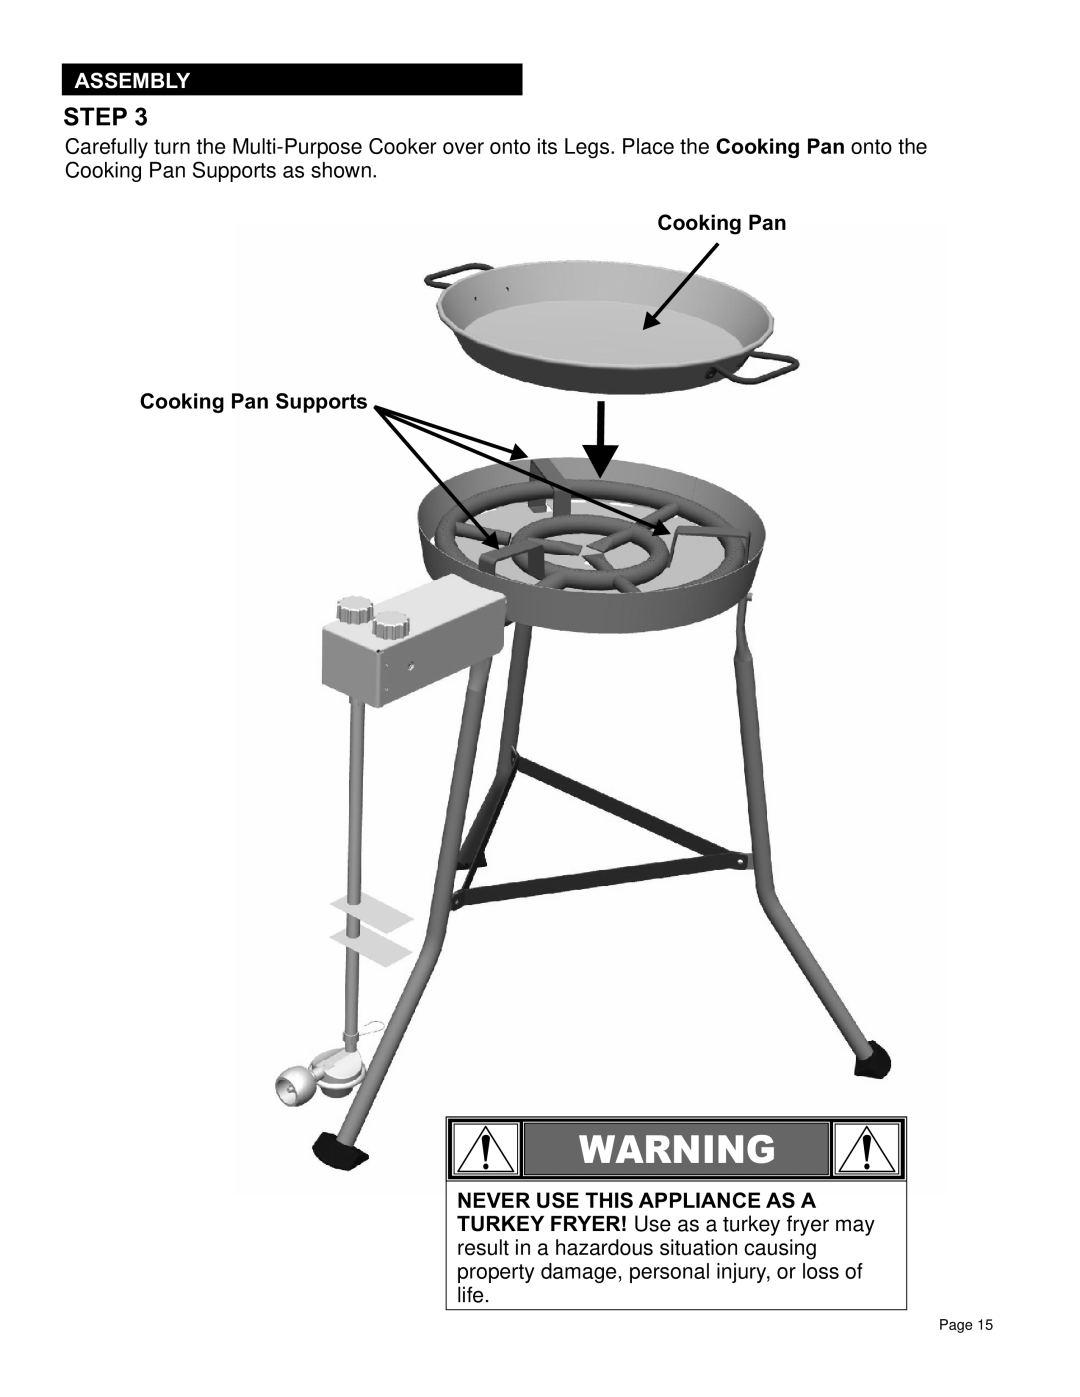 Char-Broil 11101706 manual Cooking Pan Cooking Pan Supports, Step, Assembly 